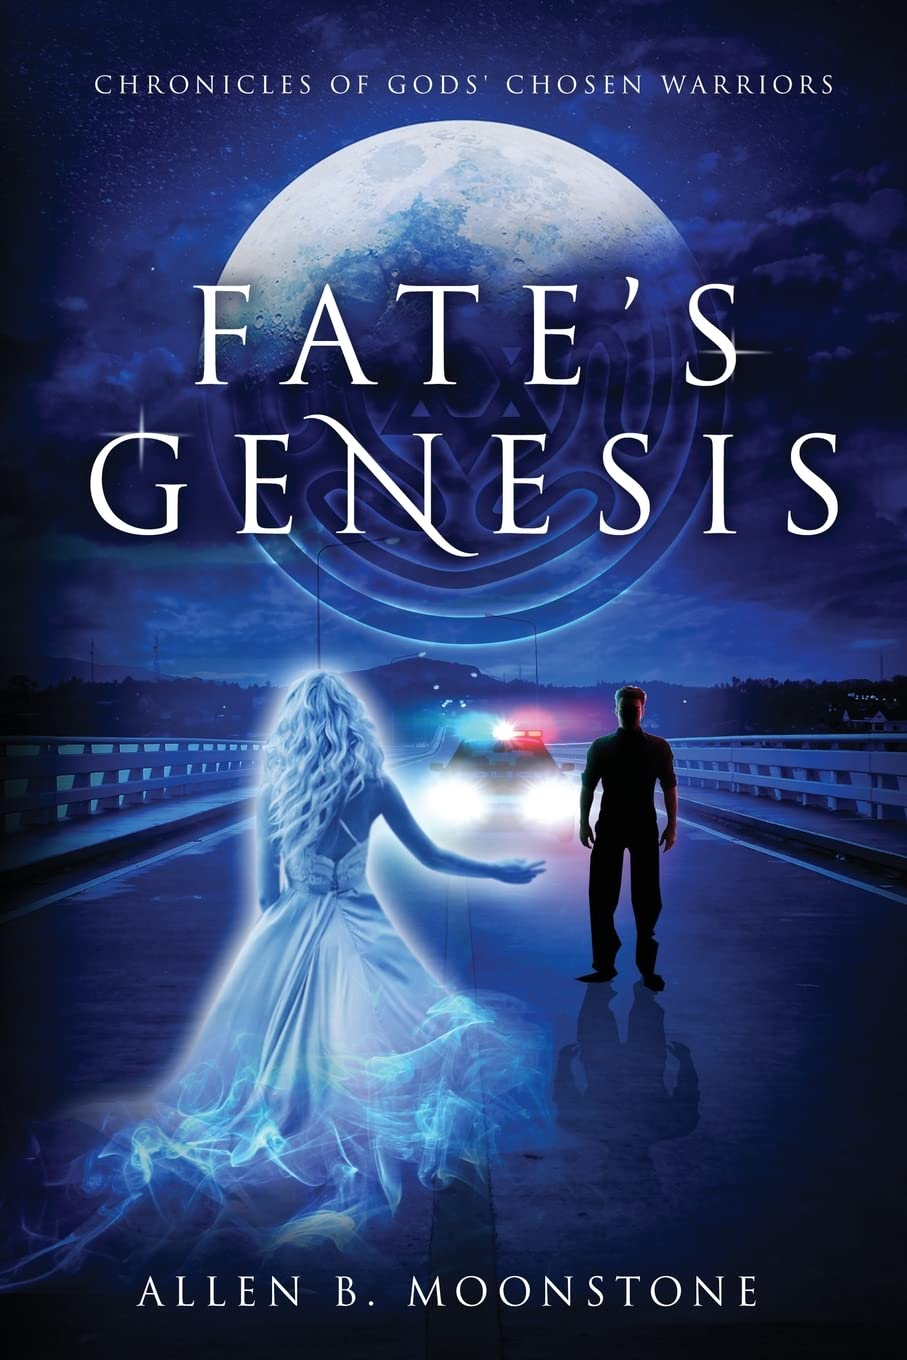 New novel "Fate’s Genesis" by Allen B. Moonstone is released, the first book of a modern-day fantasy series that pits warriors chosen by the gods against supernatural foes